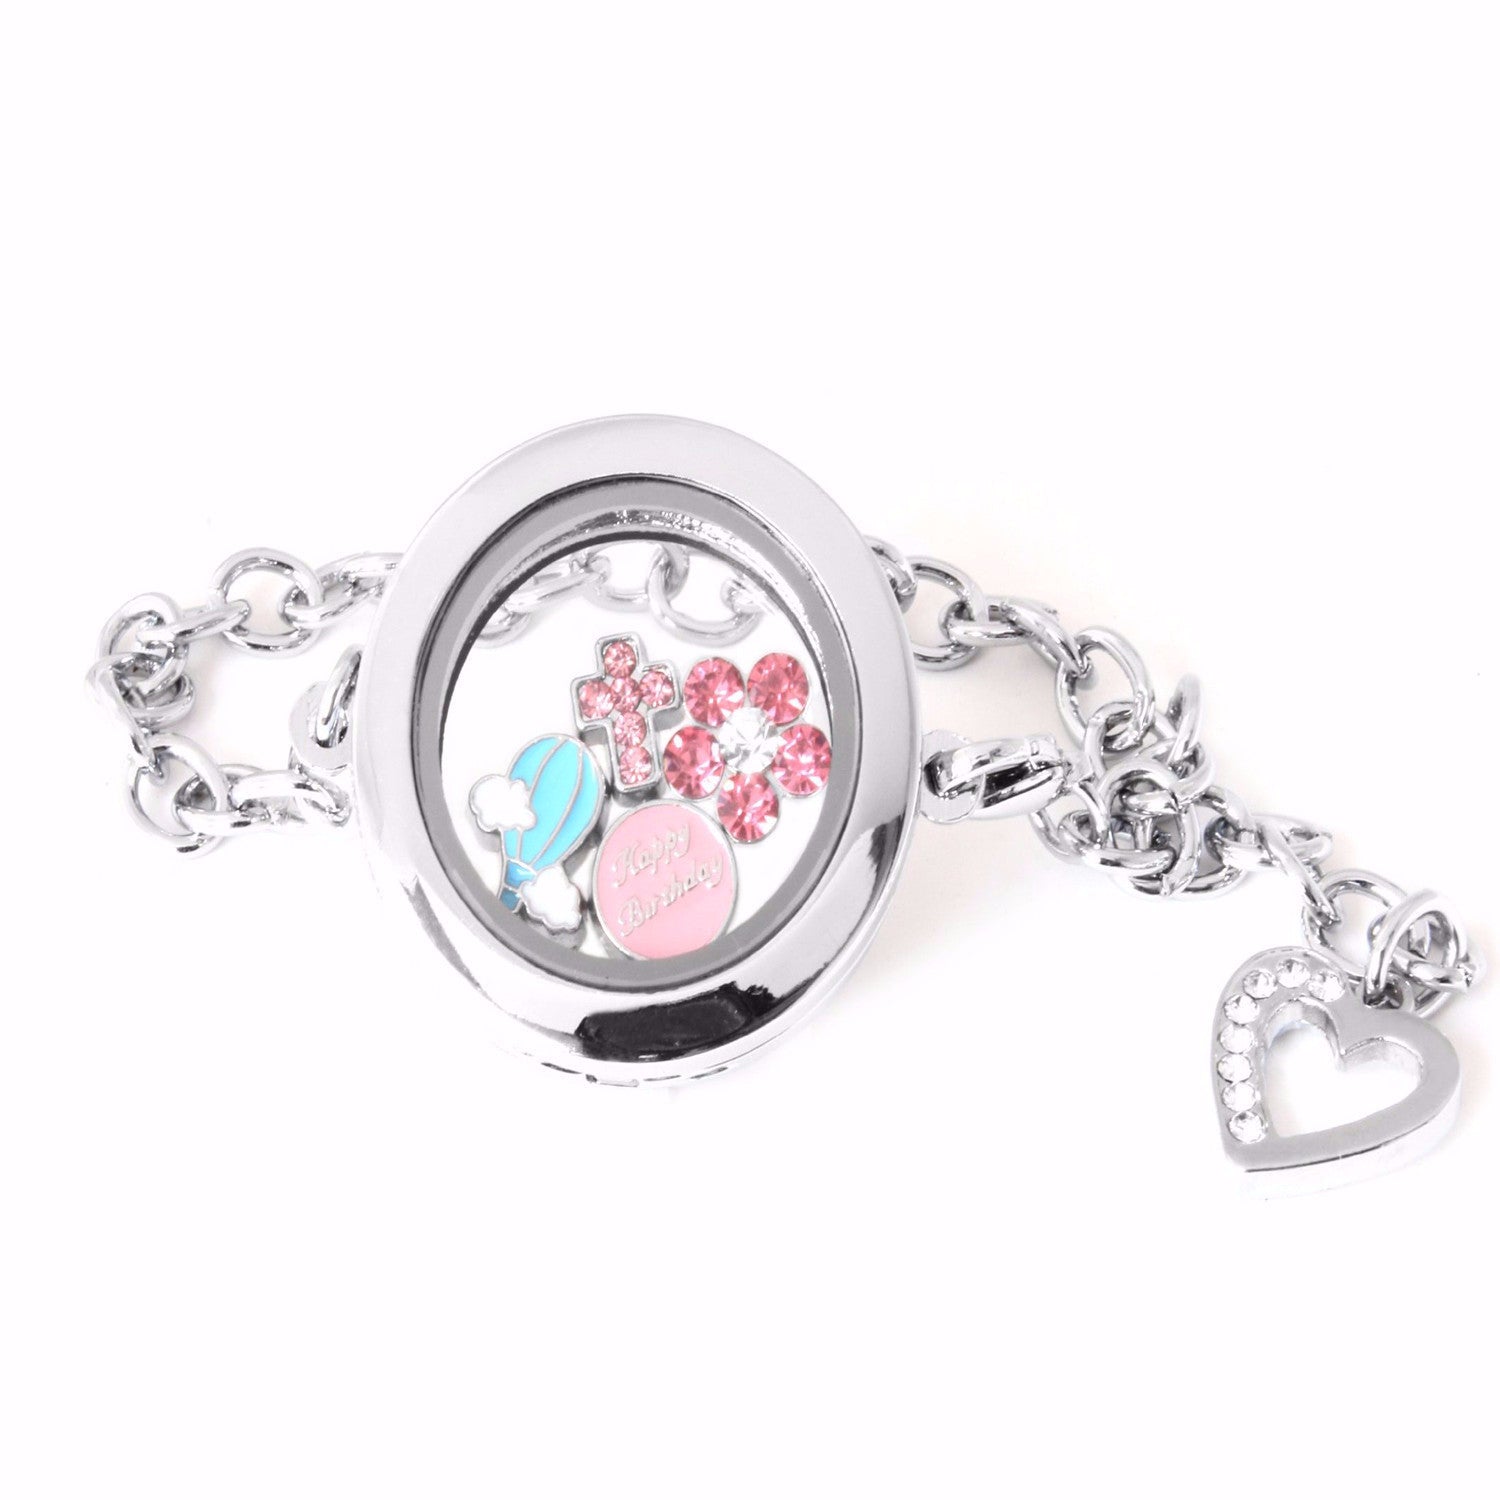 Silver Circle Floating Locket Bracelet with Dangling Heart and Choice of 4 Mini Charm